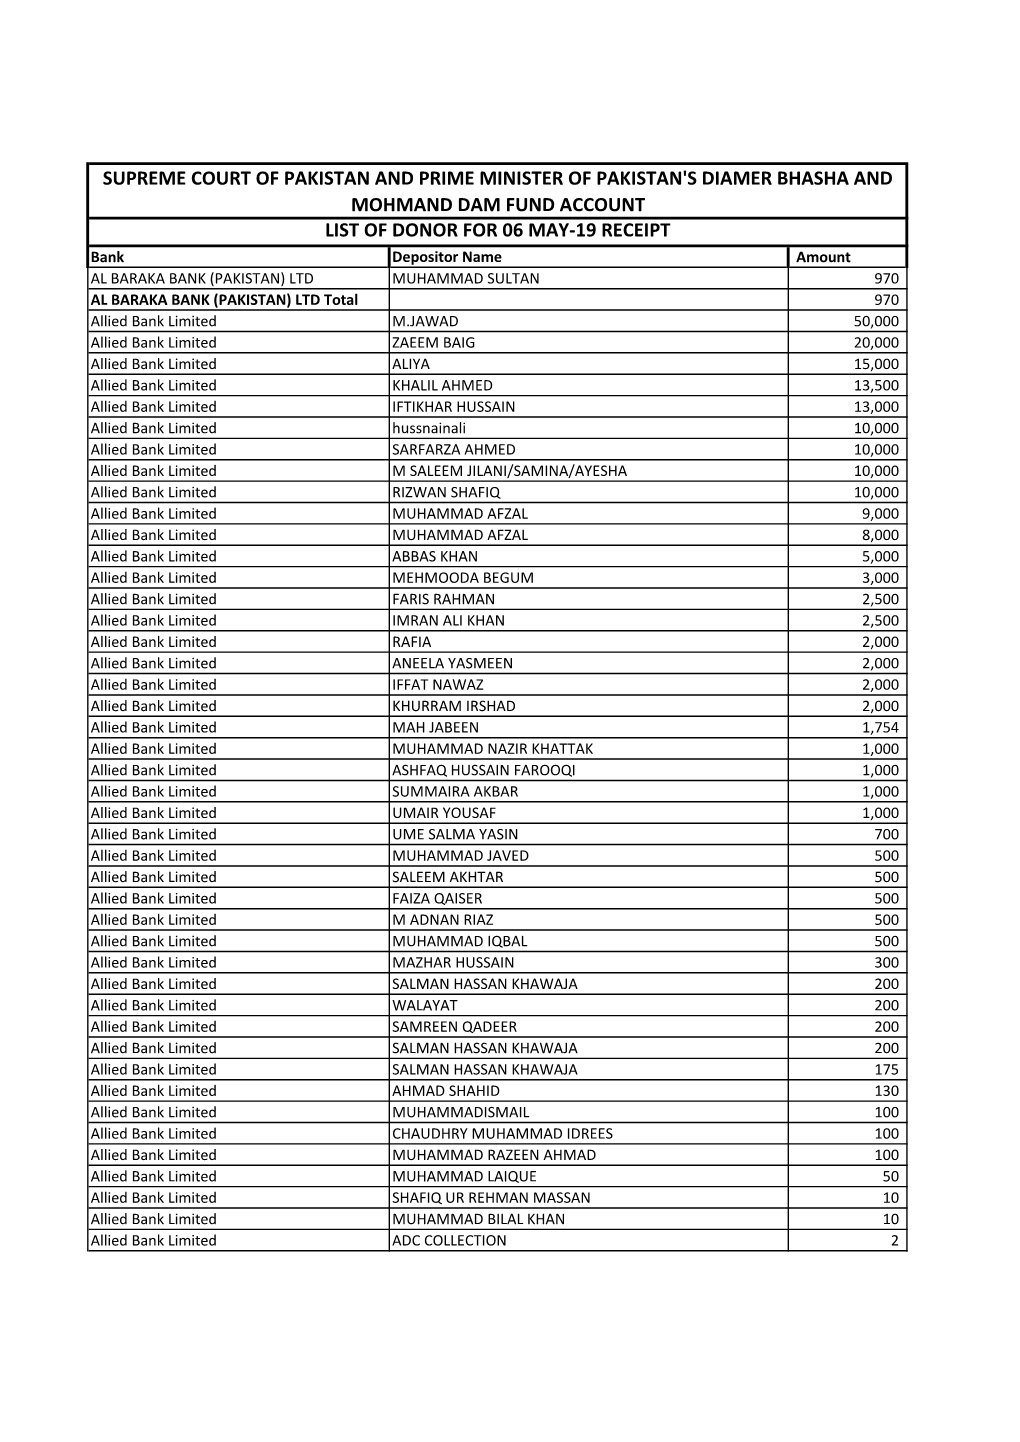 Supreme Court of Pakistan and Prime Minister of Pakistan's Diamer Bhasha and Mohmand Dam Fund Account List of Donor for 06 May-1